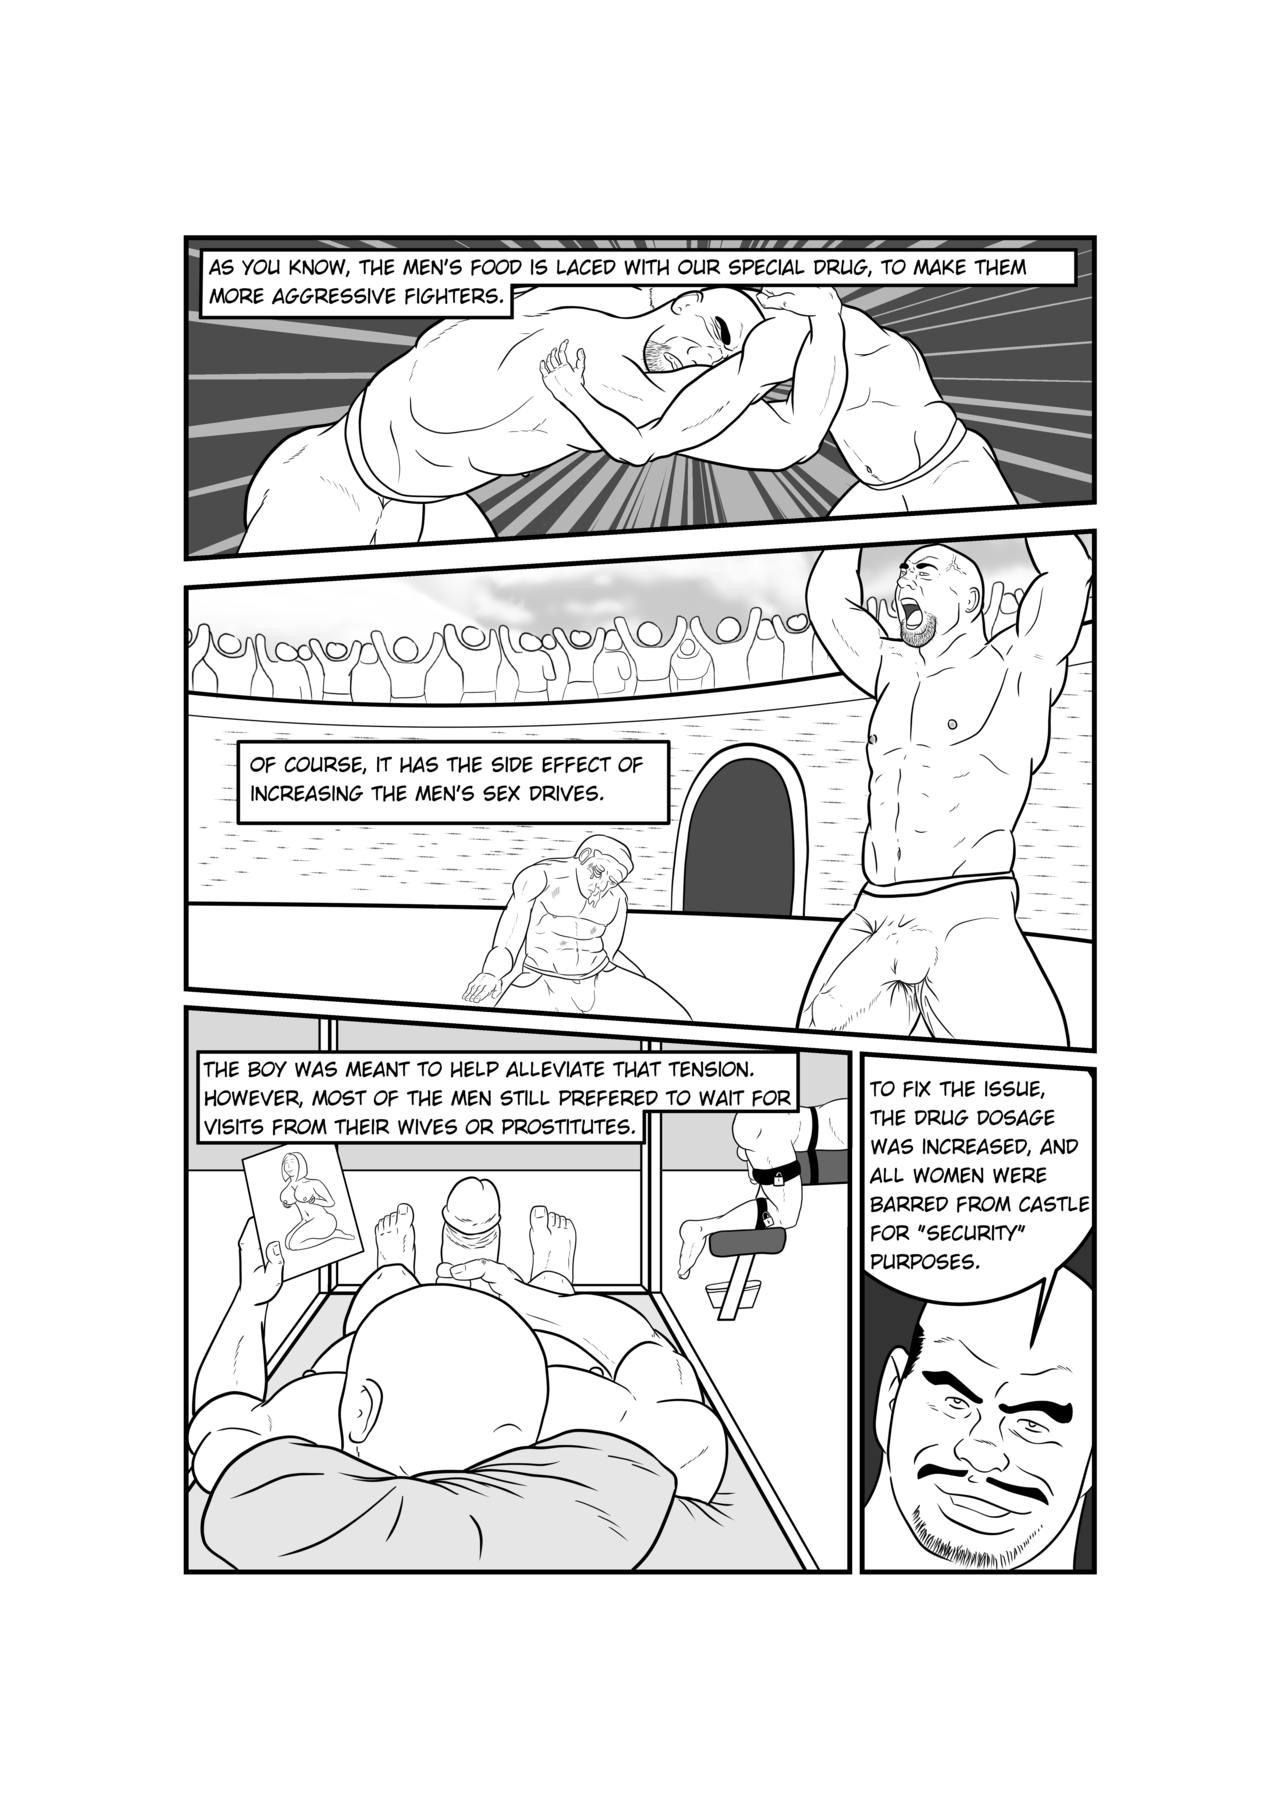 Titten Father and Son in Hell - Unauthorized Fan Comic - Original Teen Porn - Page 3